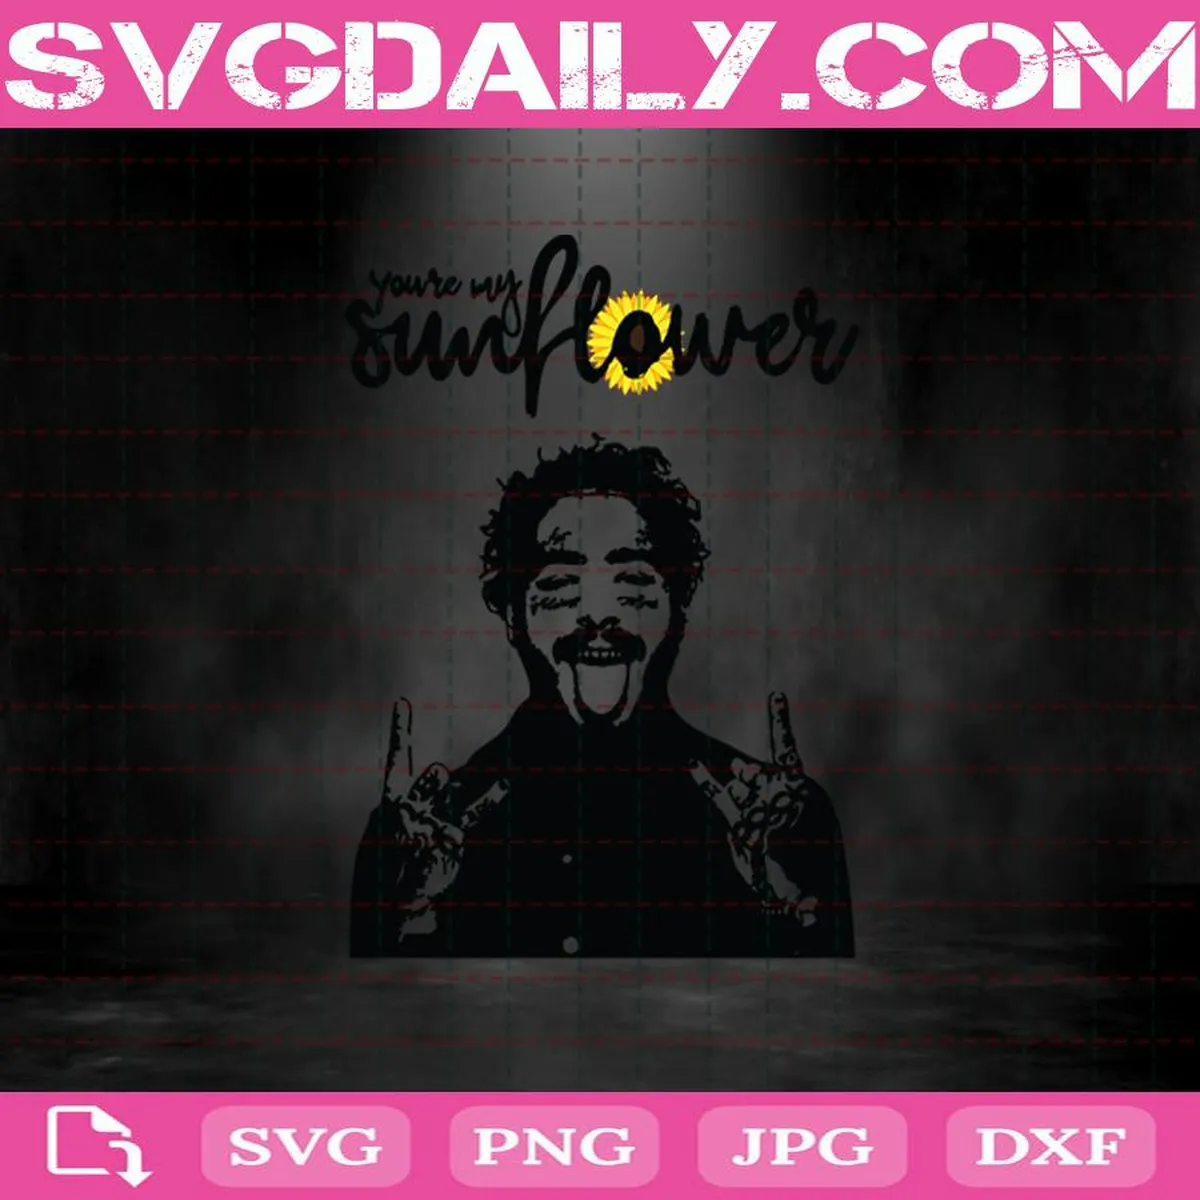 Post Malone You’re My Sunflower Svg, Post Malone Svg, Post Malone Sunflower Svg, Sunflower Svg, Sunflower Lover Svg